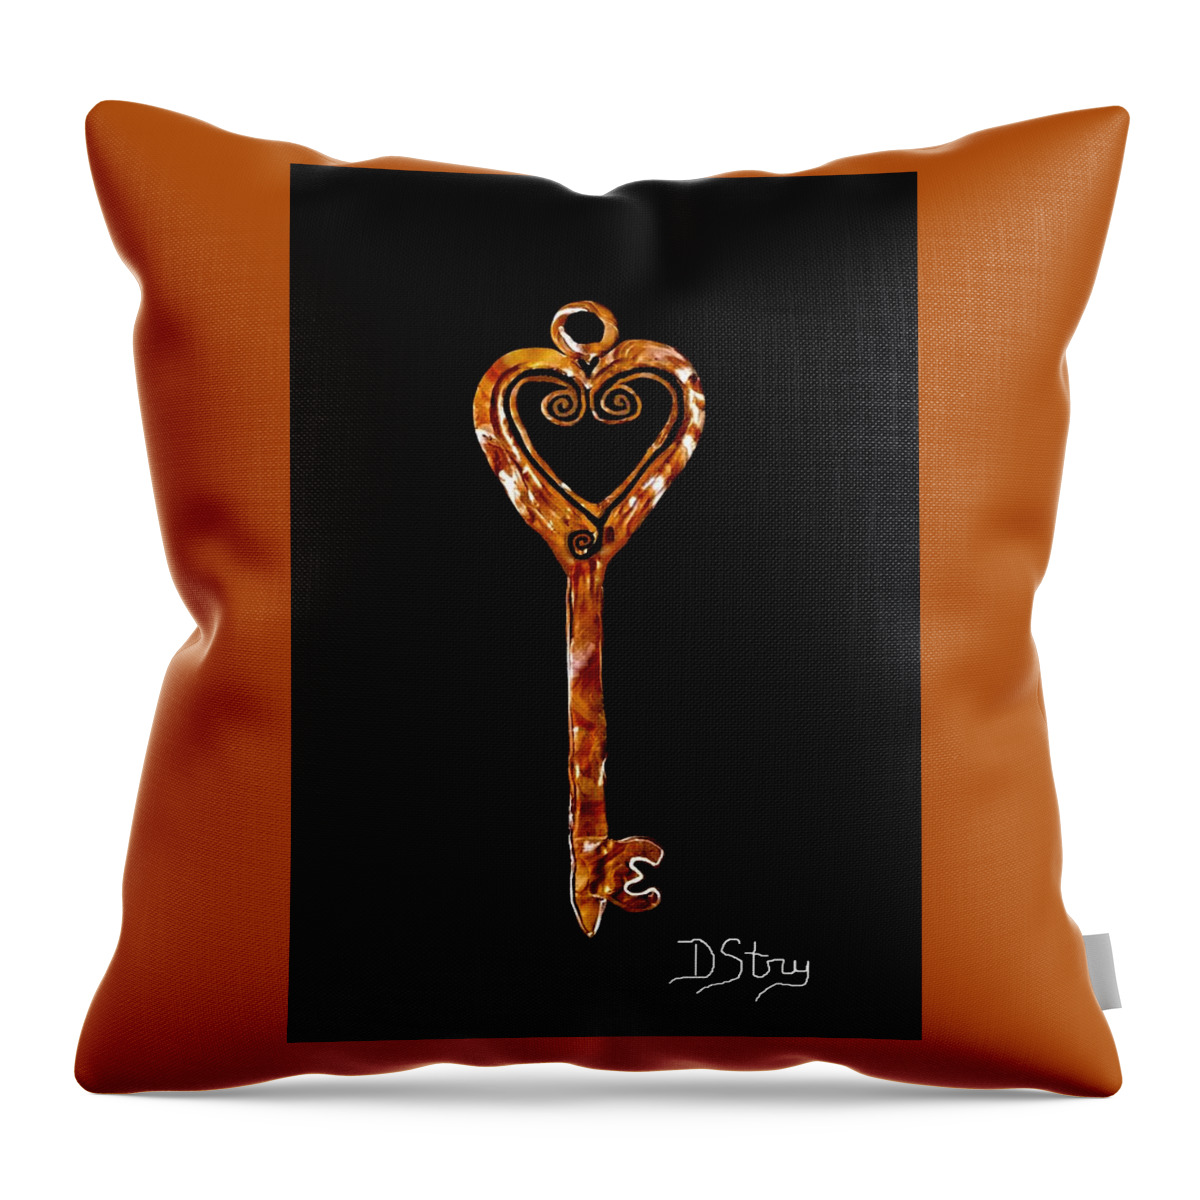 Polymer Clay Throw Pillow featuring the mixed media The Golden Key by Deborah Stanley